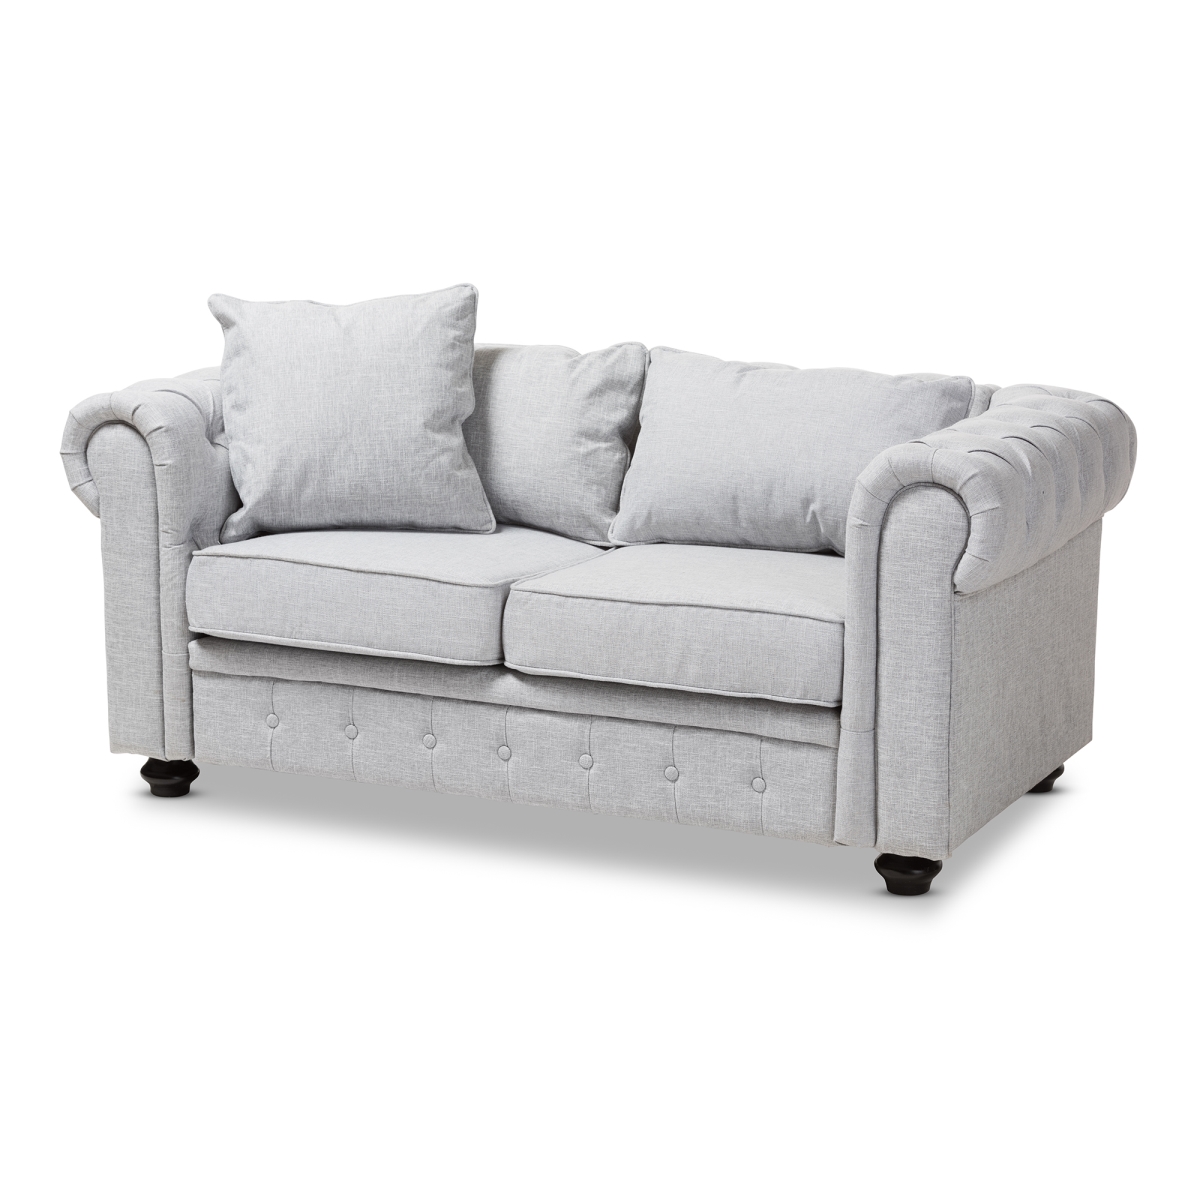 Rx1616-gray-ls Alaise Modern Classic Chesterfield Loveseat, Grey